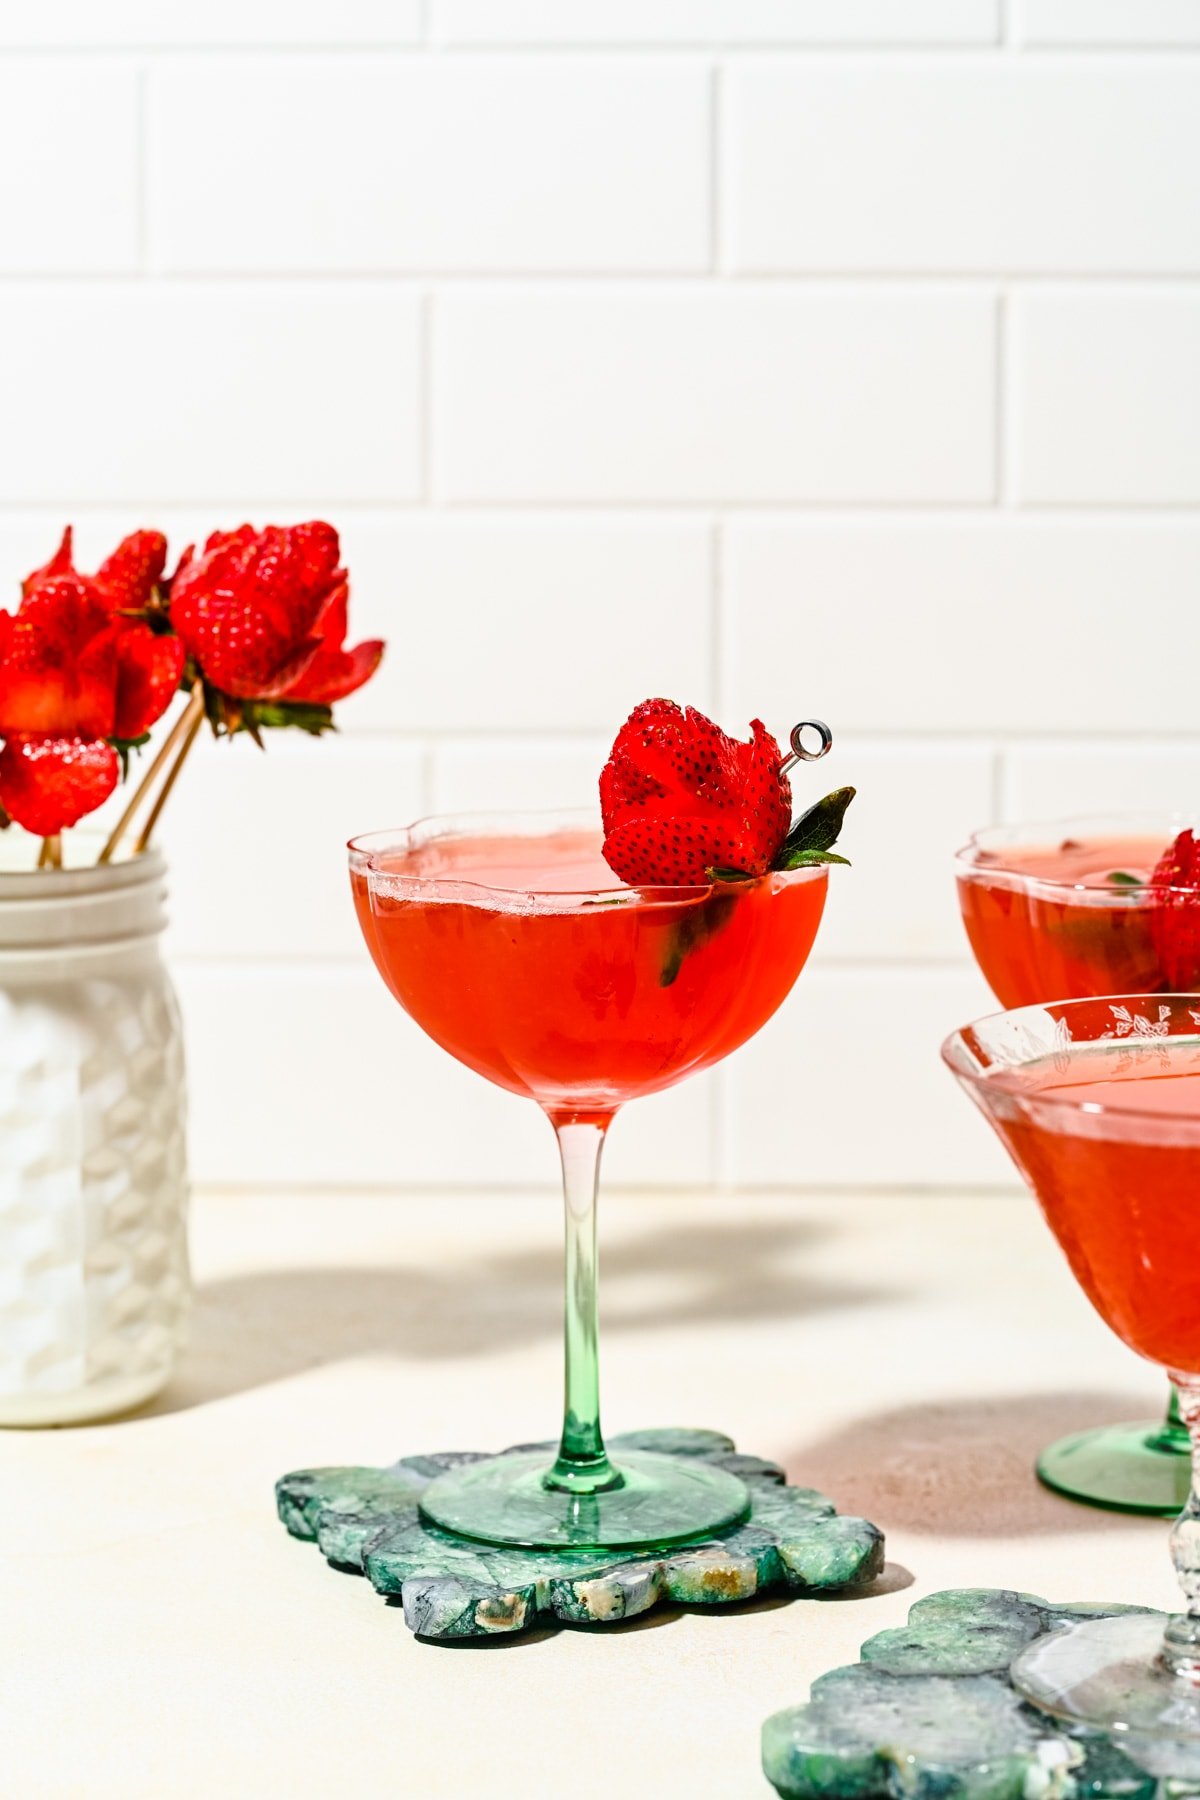 Finished strawberry martinis in martini glasses garnished with a strawberry rose.